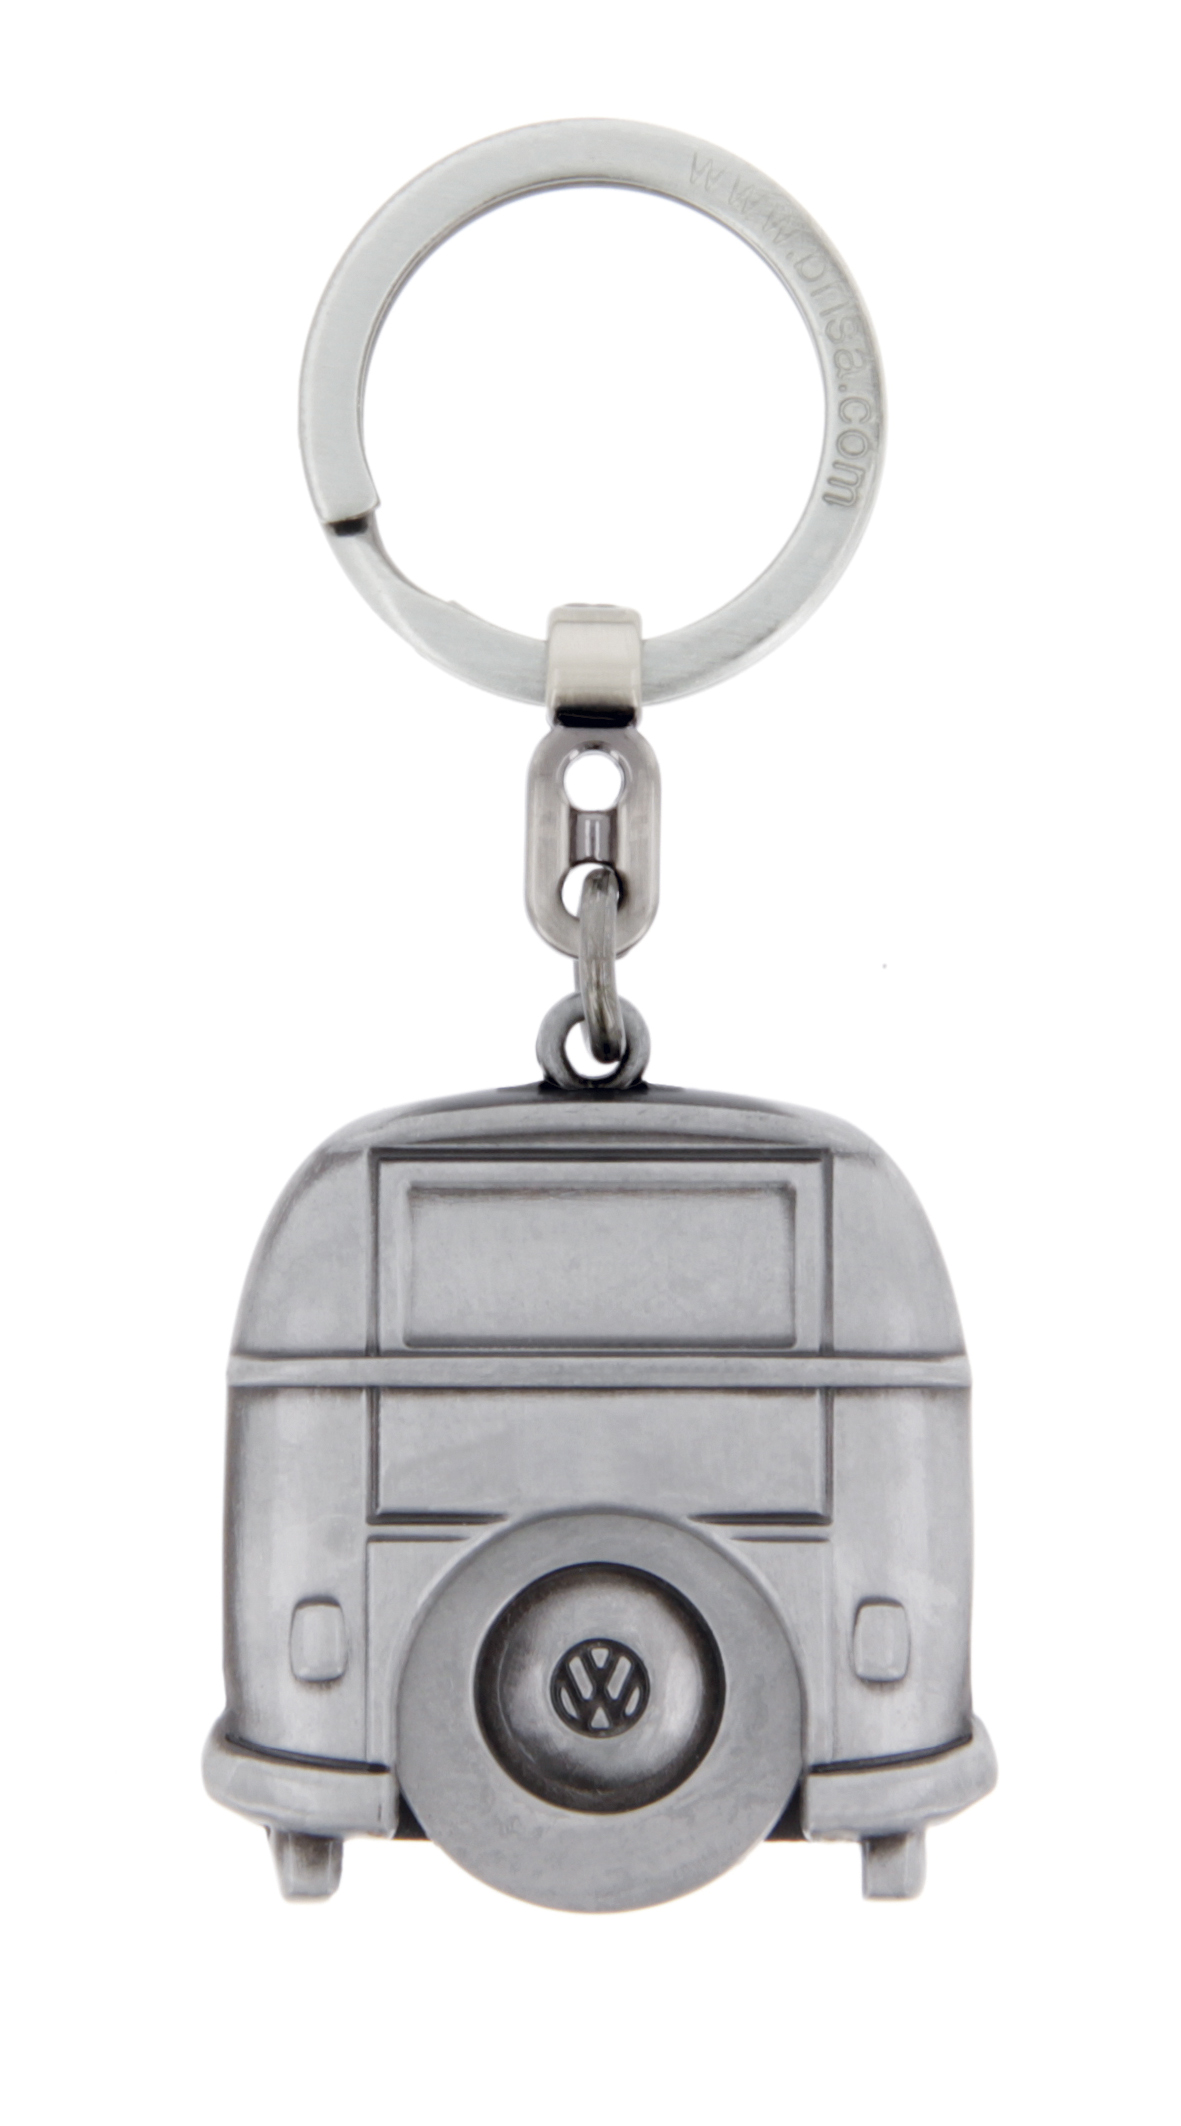 VW T1 Bulli bus keychain with shopping cart chip in gift box - antique silver look
